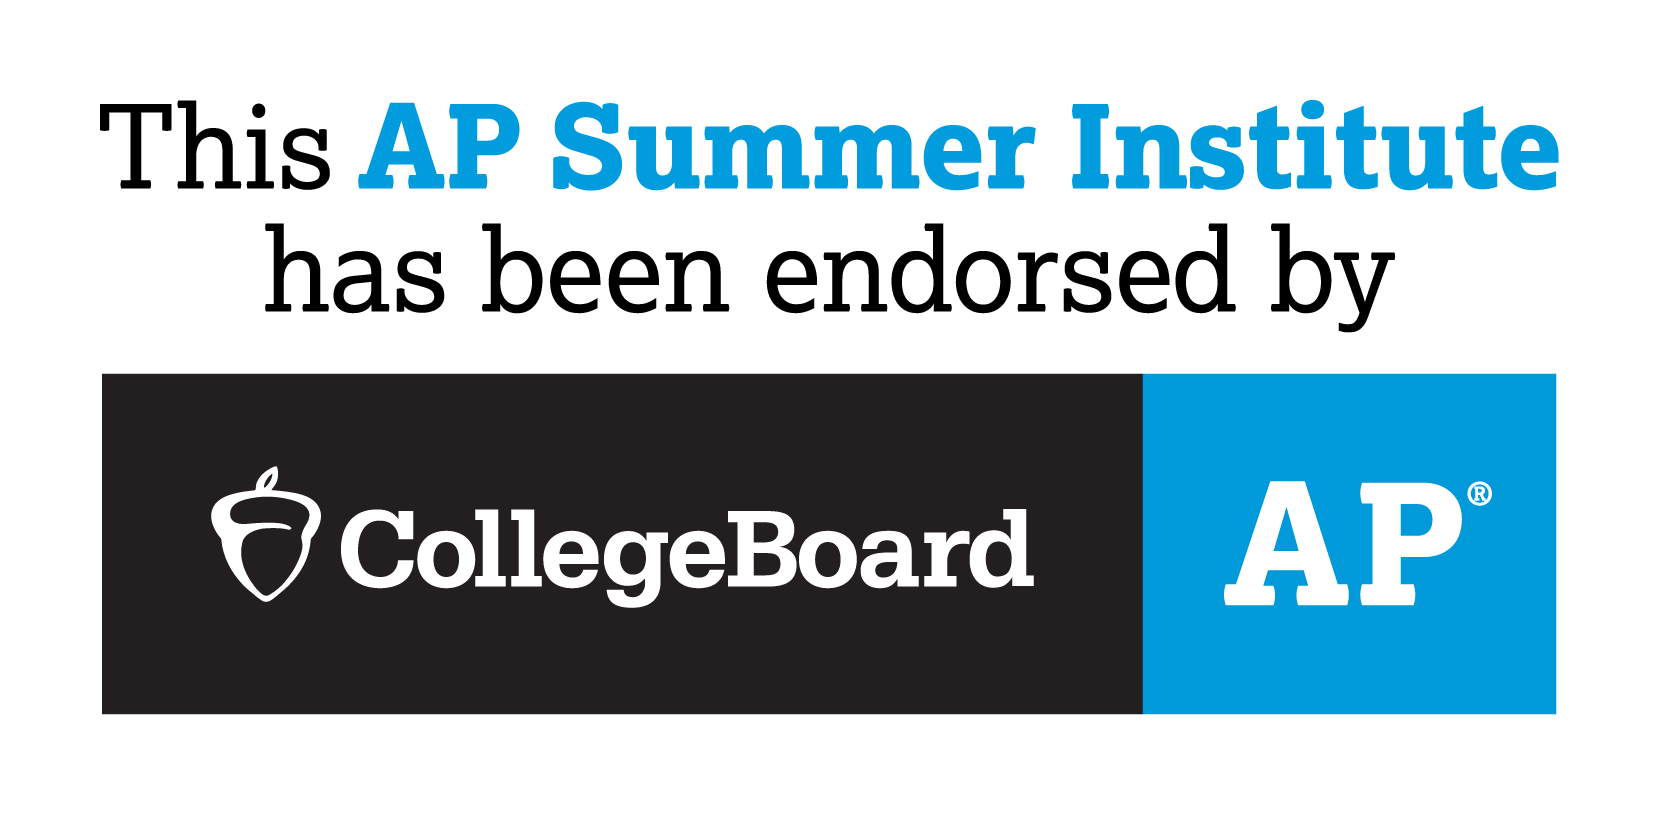 This AP Summer Institute has been endorsed by the College Board.